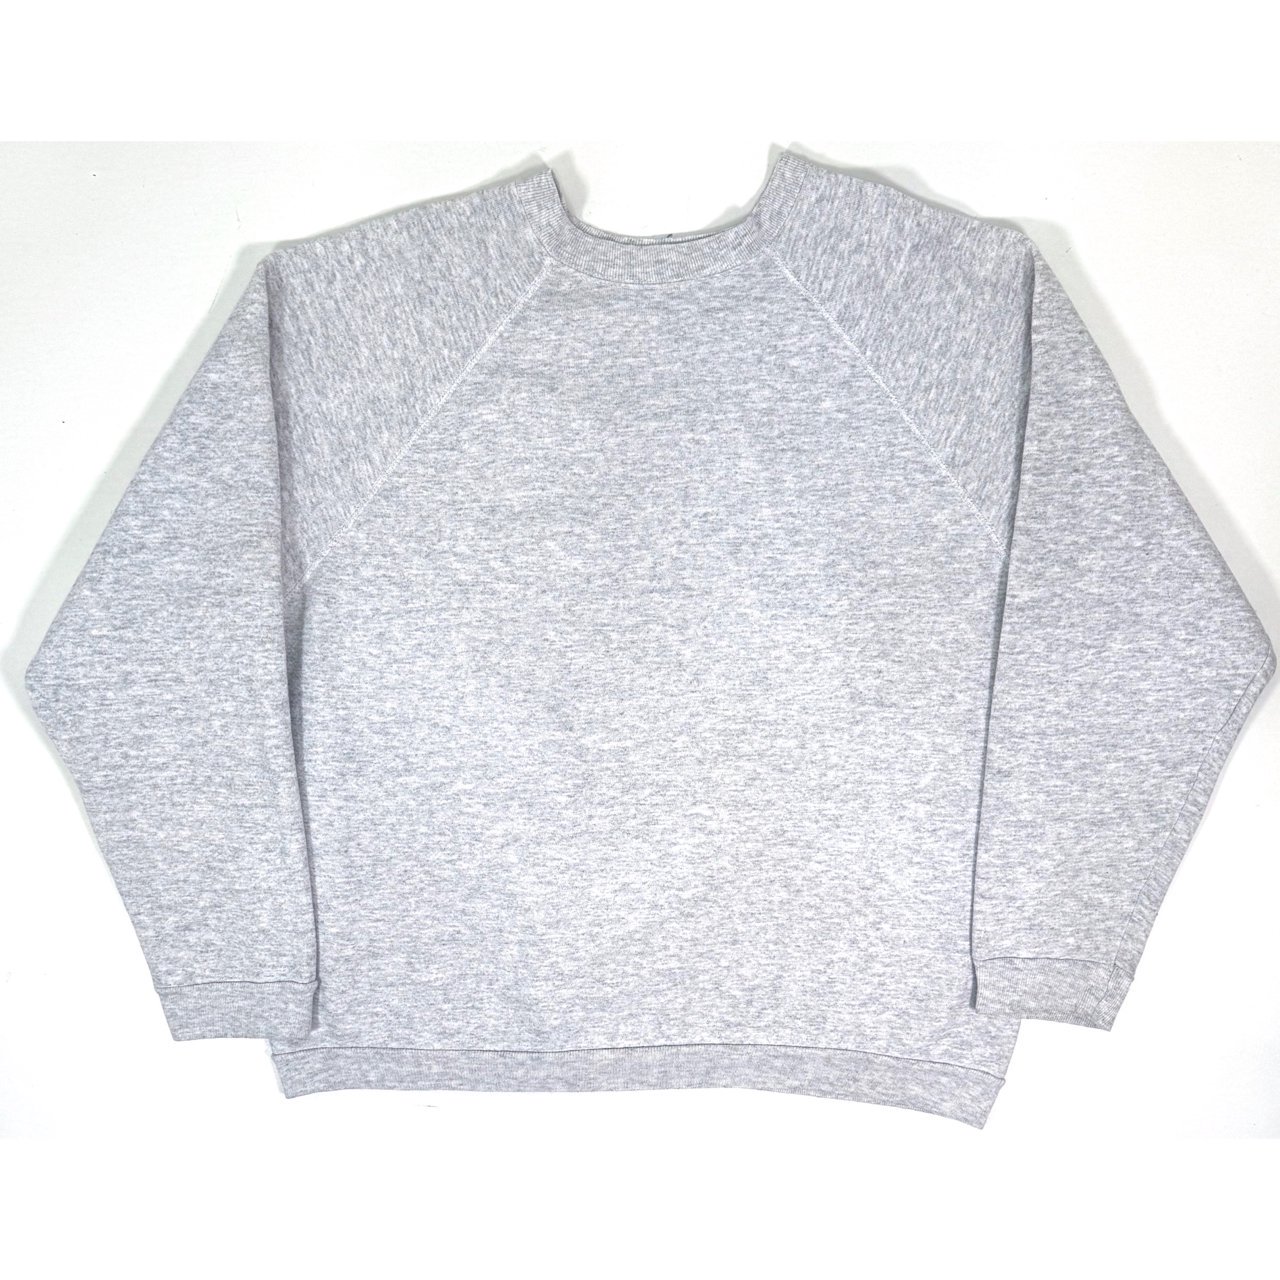 1990s TULTEX Sweat shirts XL MADE IN USA Gray